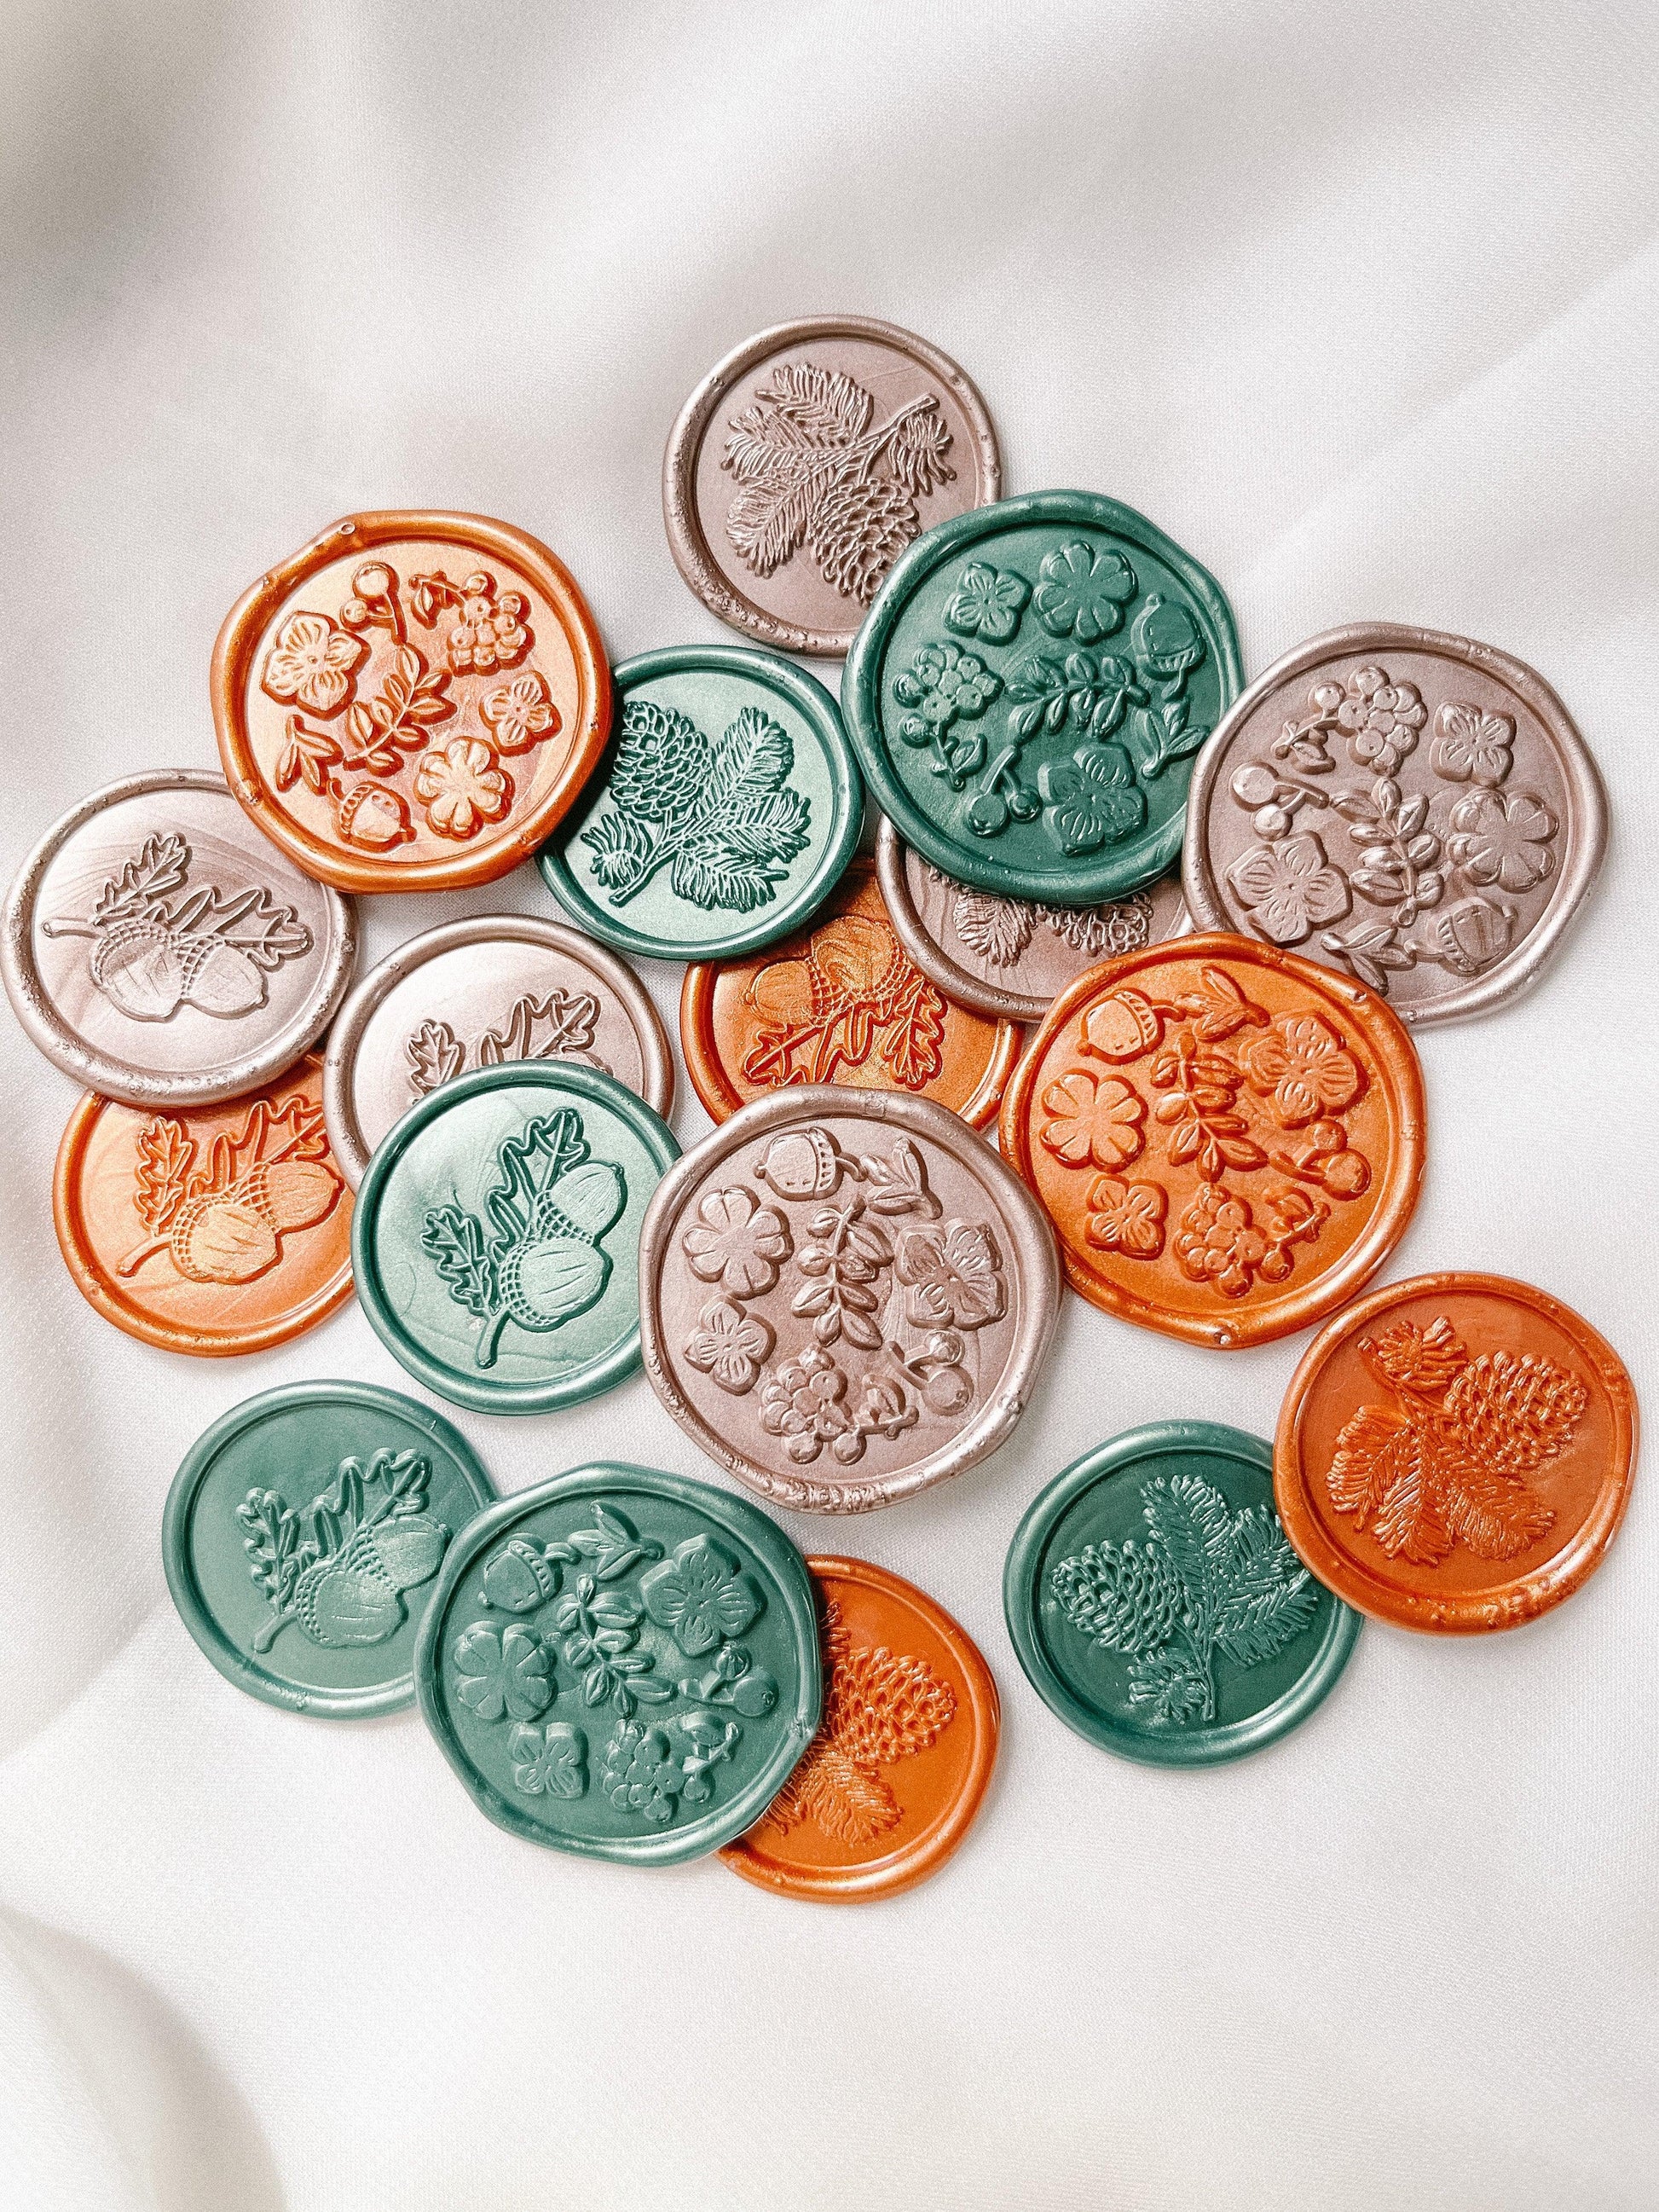 Pinecone wax seals - Set of 9 - Made of Honour Co.